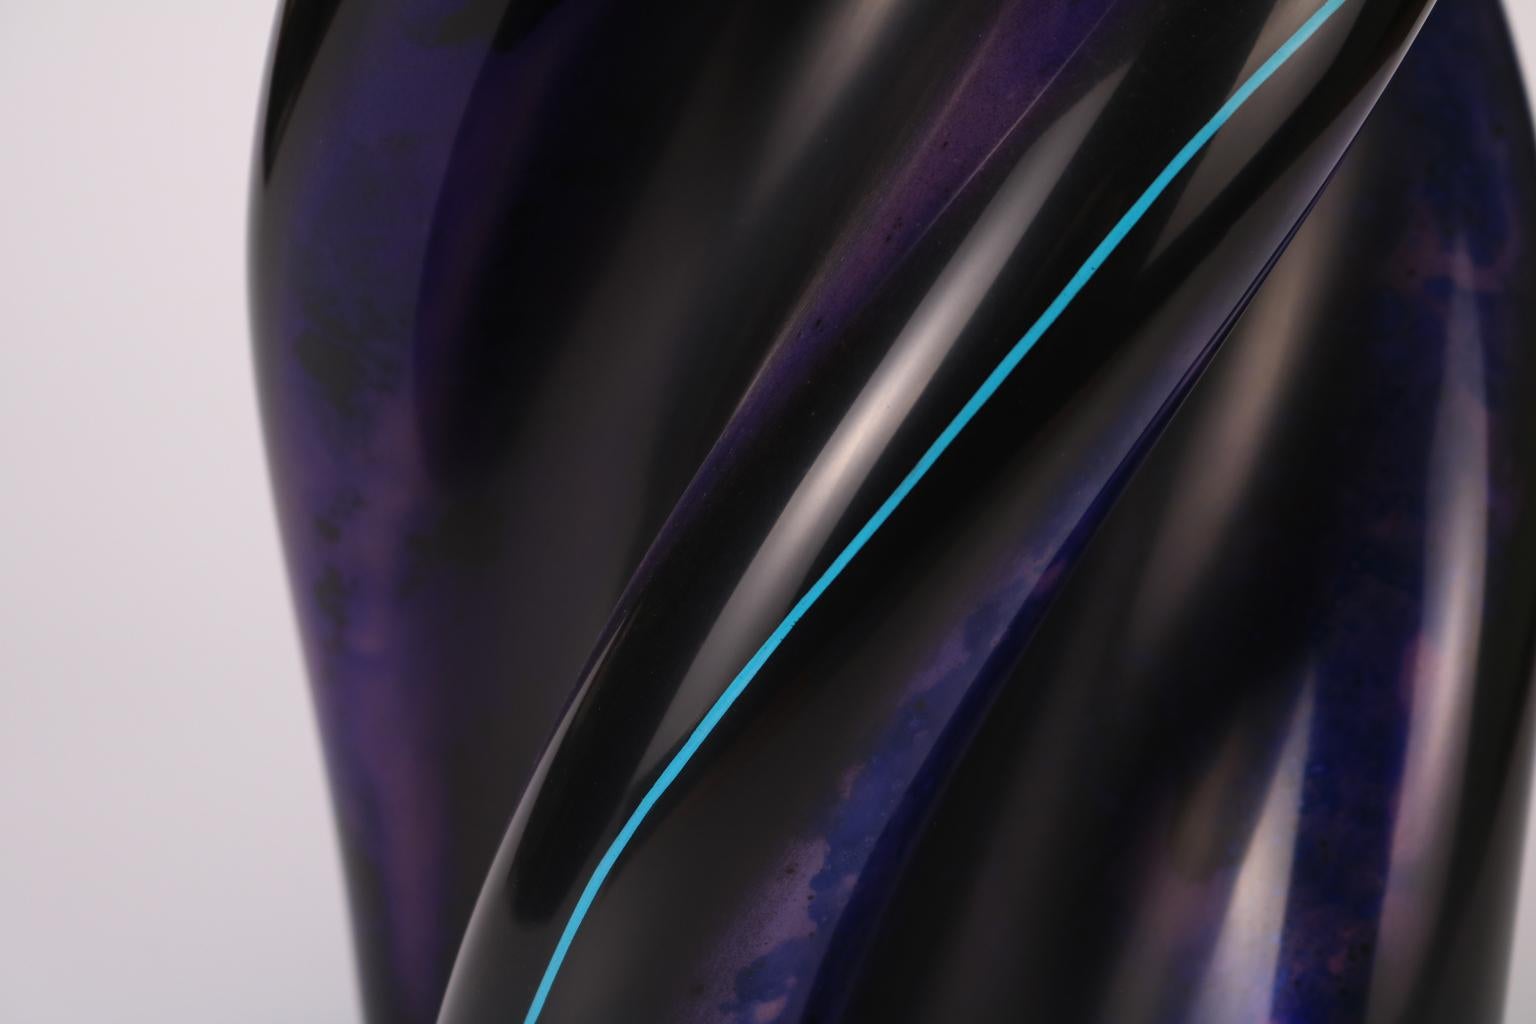 Contemporary 21st Century, Four Lobe Blue and Purple Lacquered Ceramic Vessel For Sale